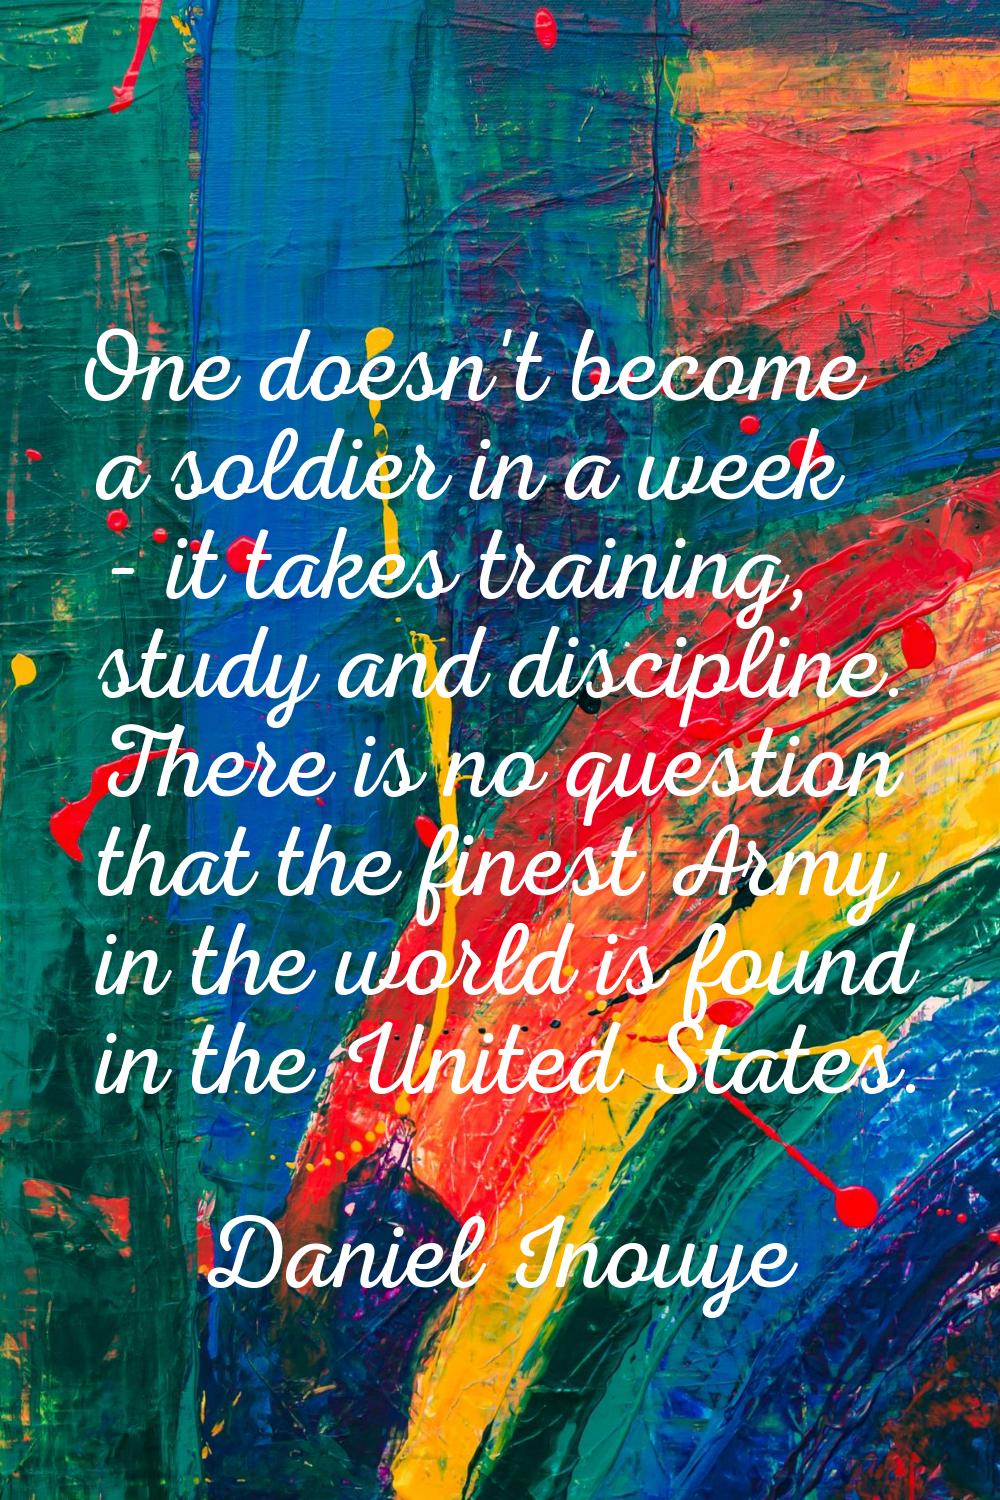 One doesn't become a soldier in a week - it takes training, study and discipline. There is no quest